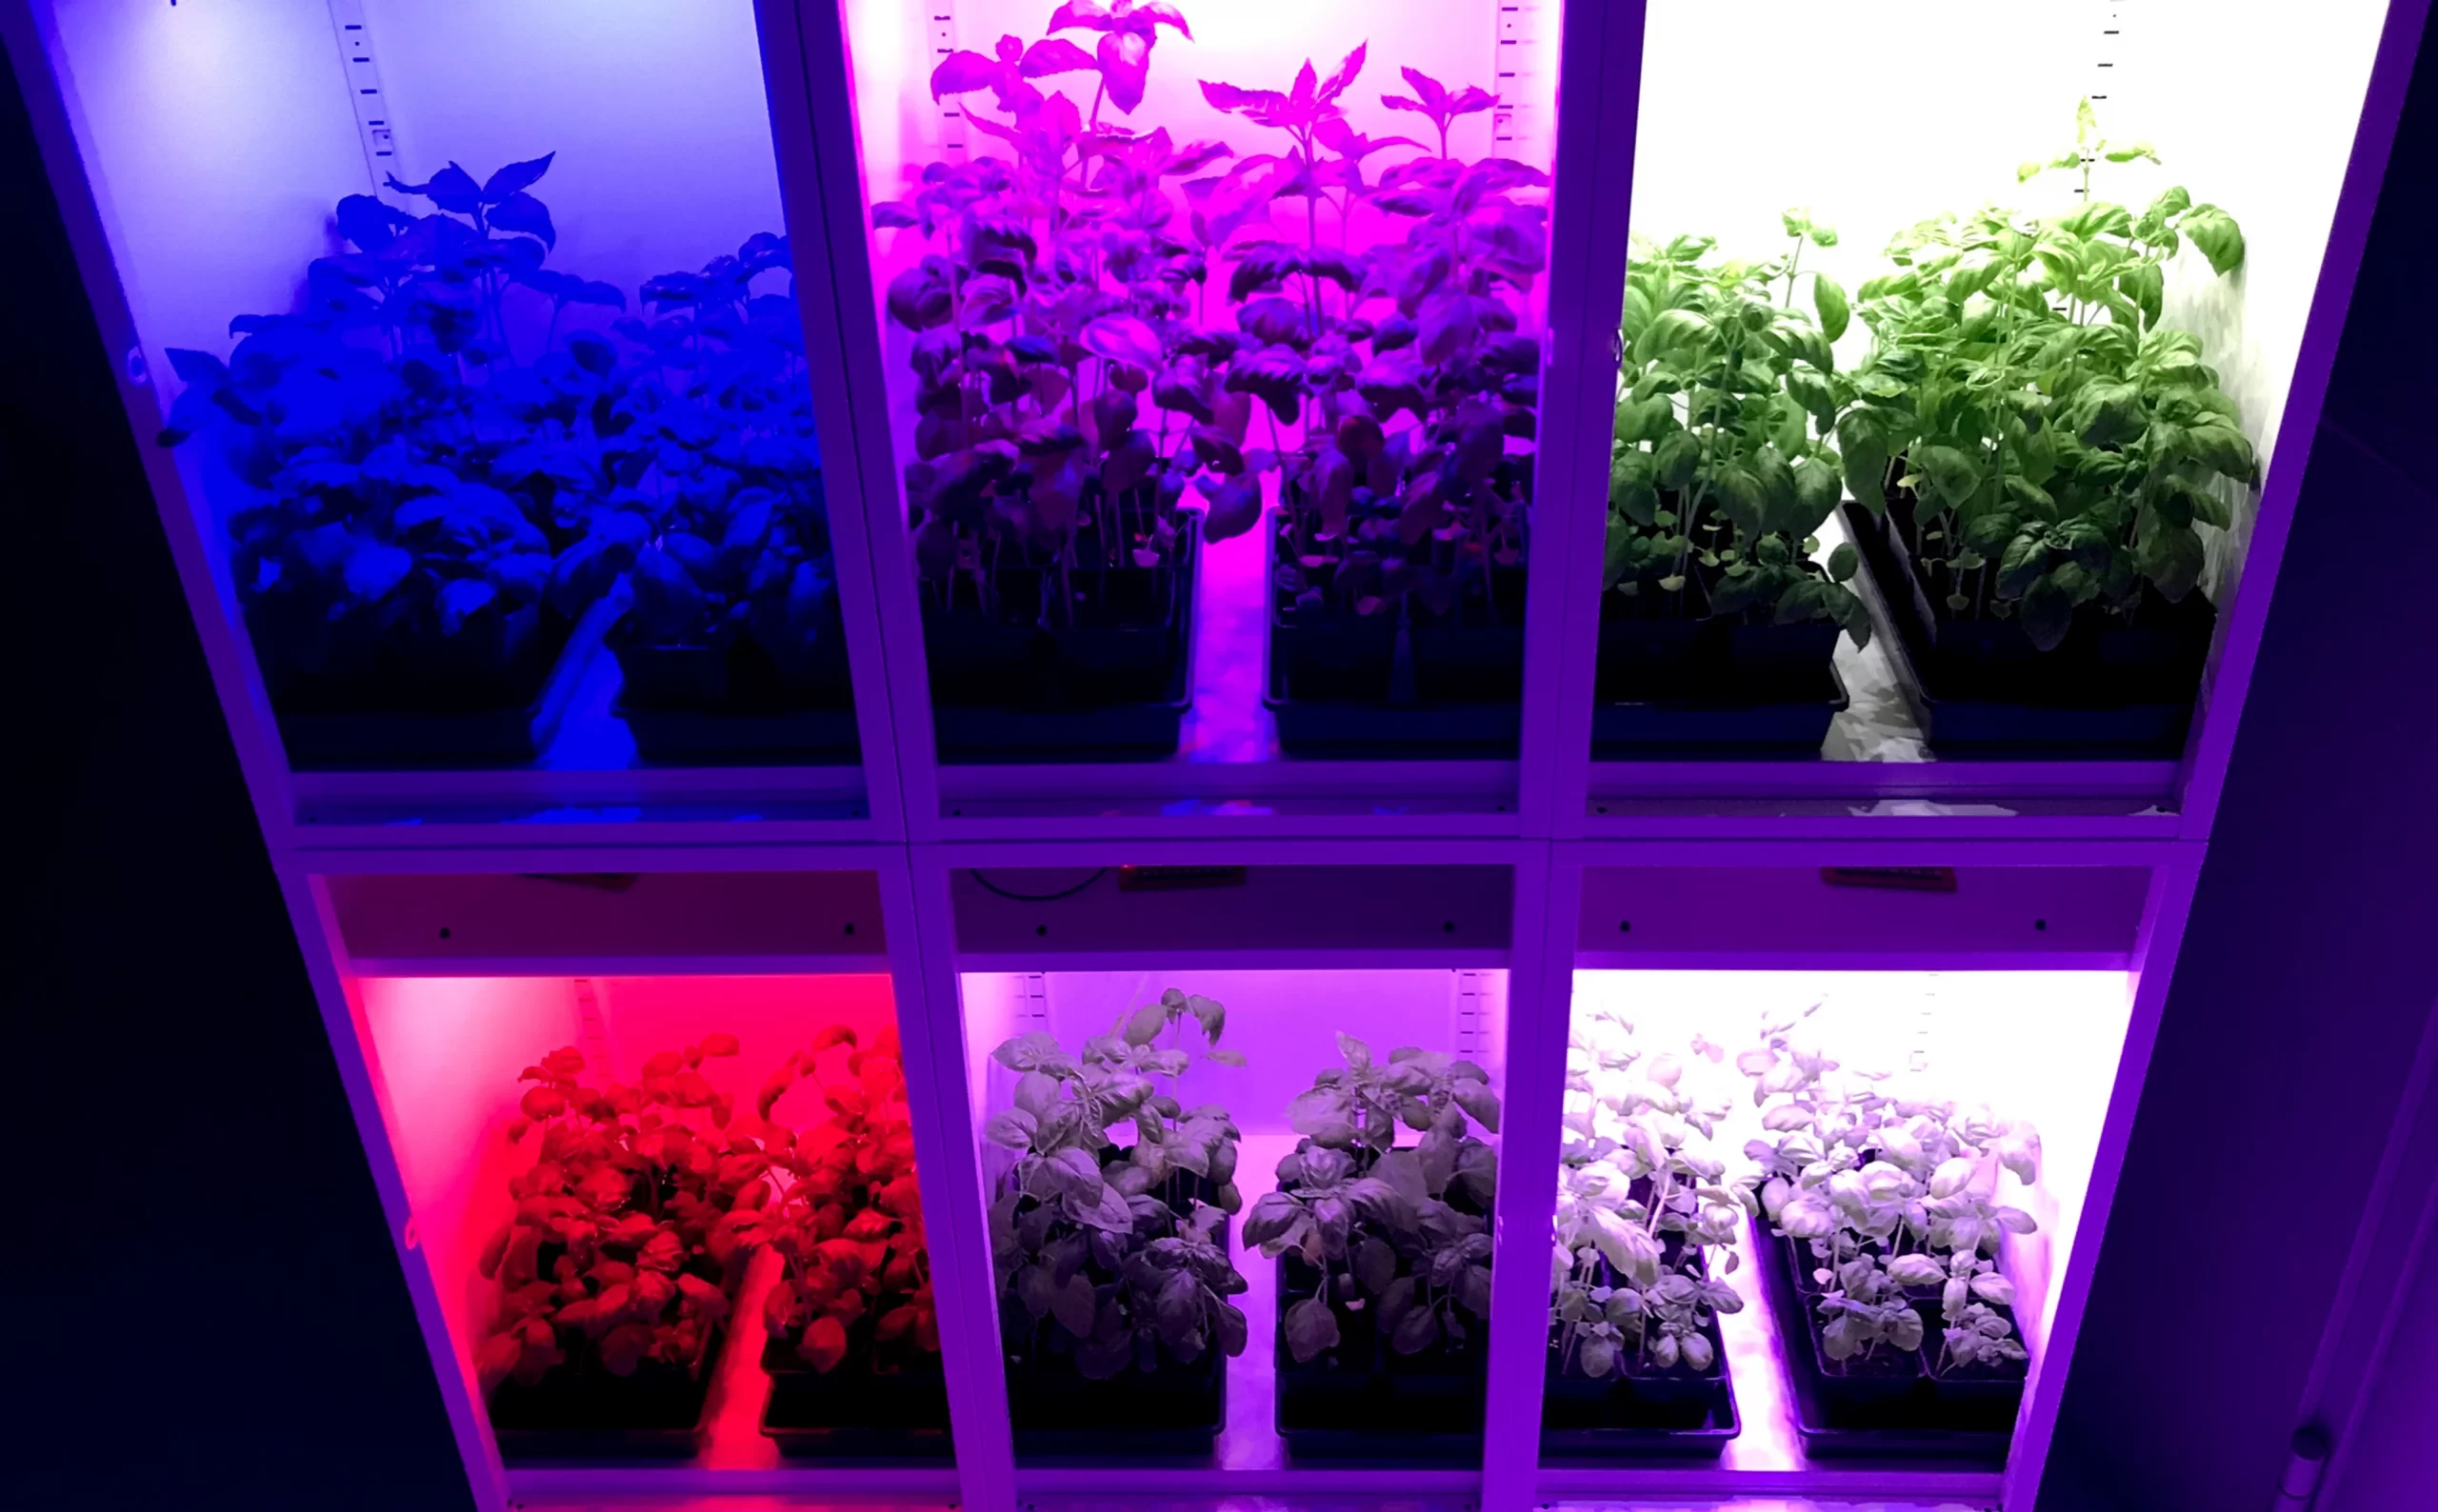 Indoor farming and horticulture light-emitting diodes – Share knowledge, drive development